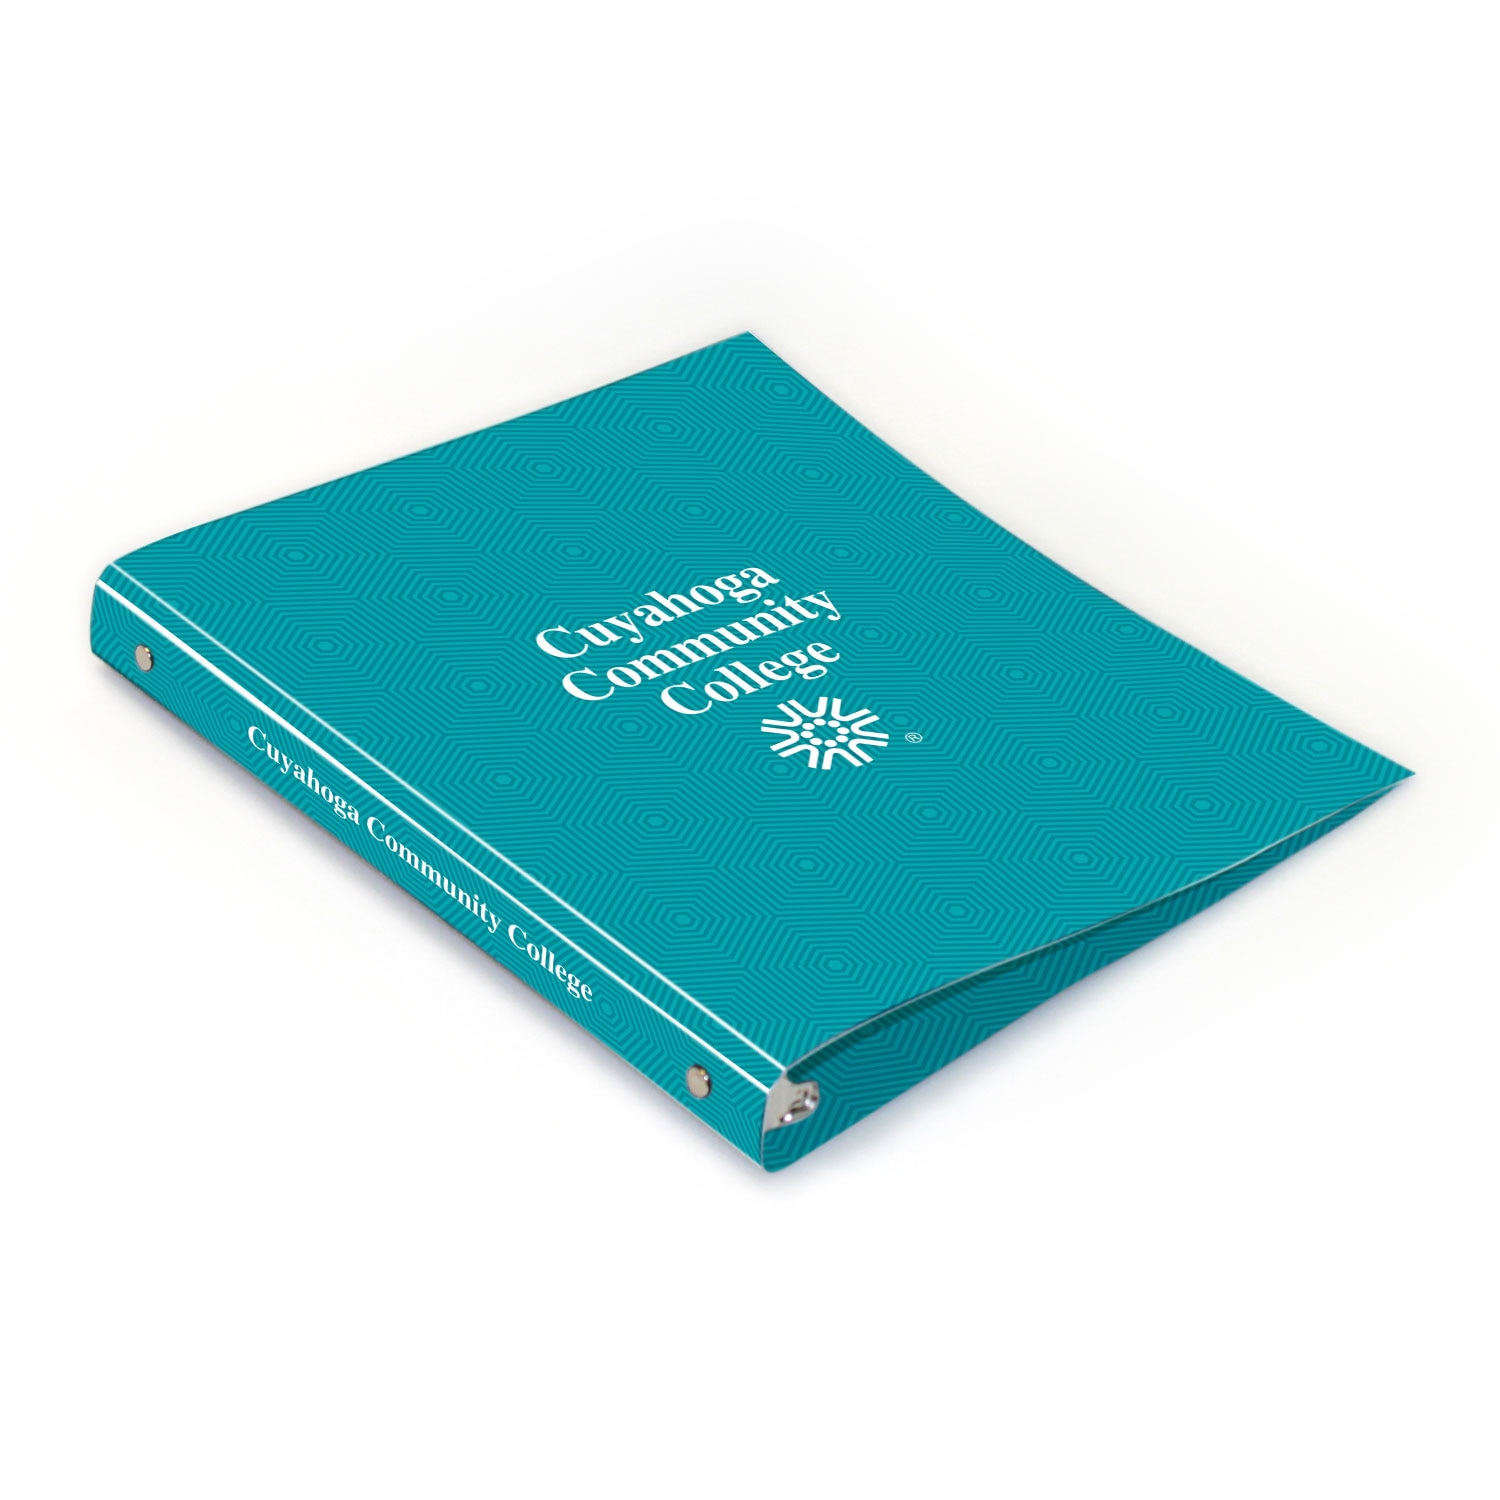 Cuyahoga Community College Full Color 2 sided Imprinted Flexible 1" Logo 1 Binder 10.5" x 11.5"